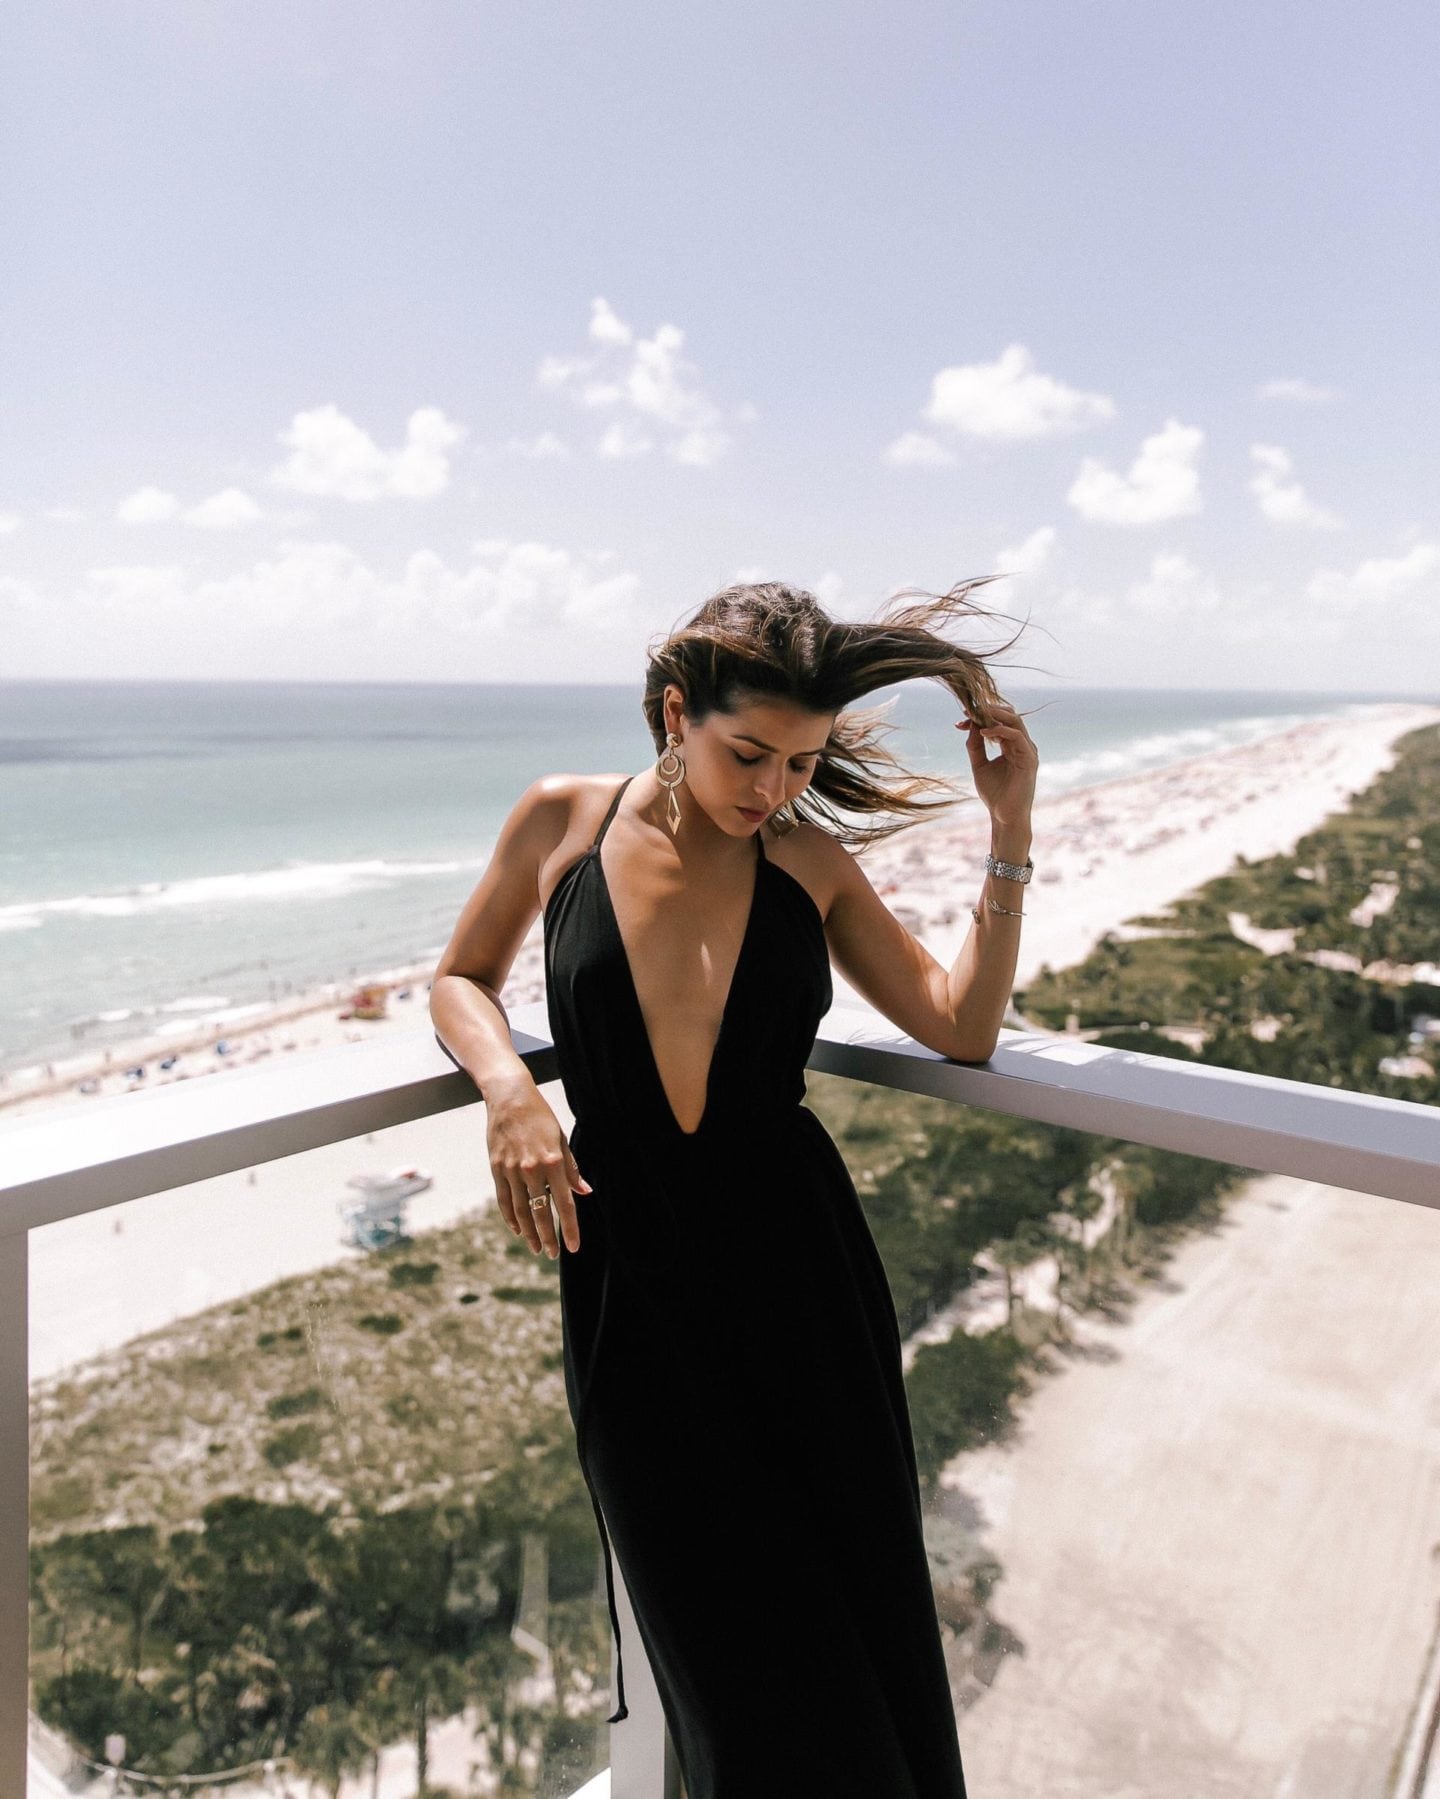 How to Take Better Instagram Outfit Photos by Pam Hetlinger | TheGirlFromPanama.com | Chic Summer Outfit, deep v dress, minimal style, beach outfit, la fashion blogger